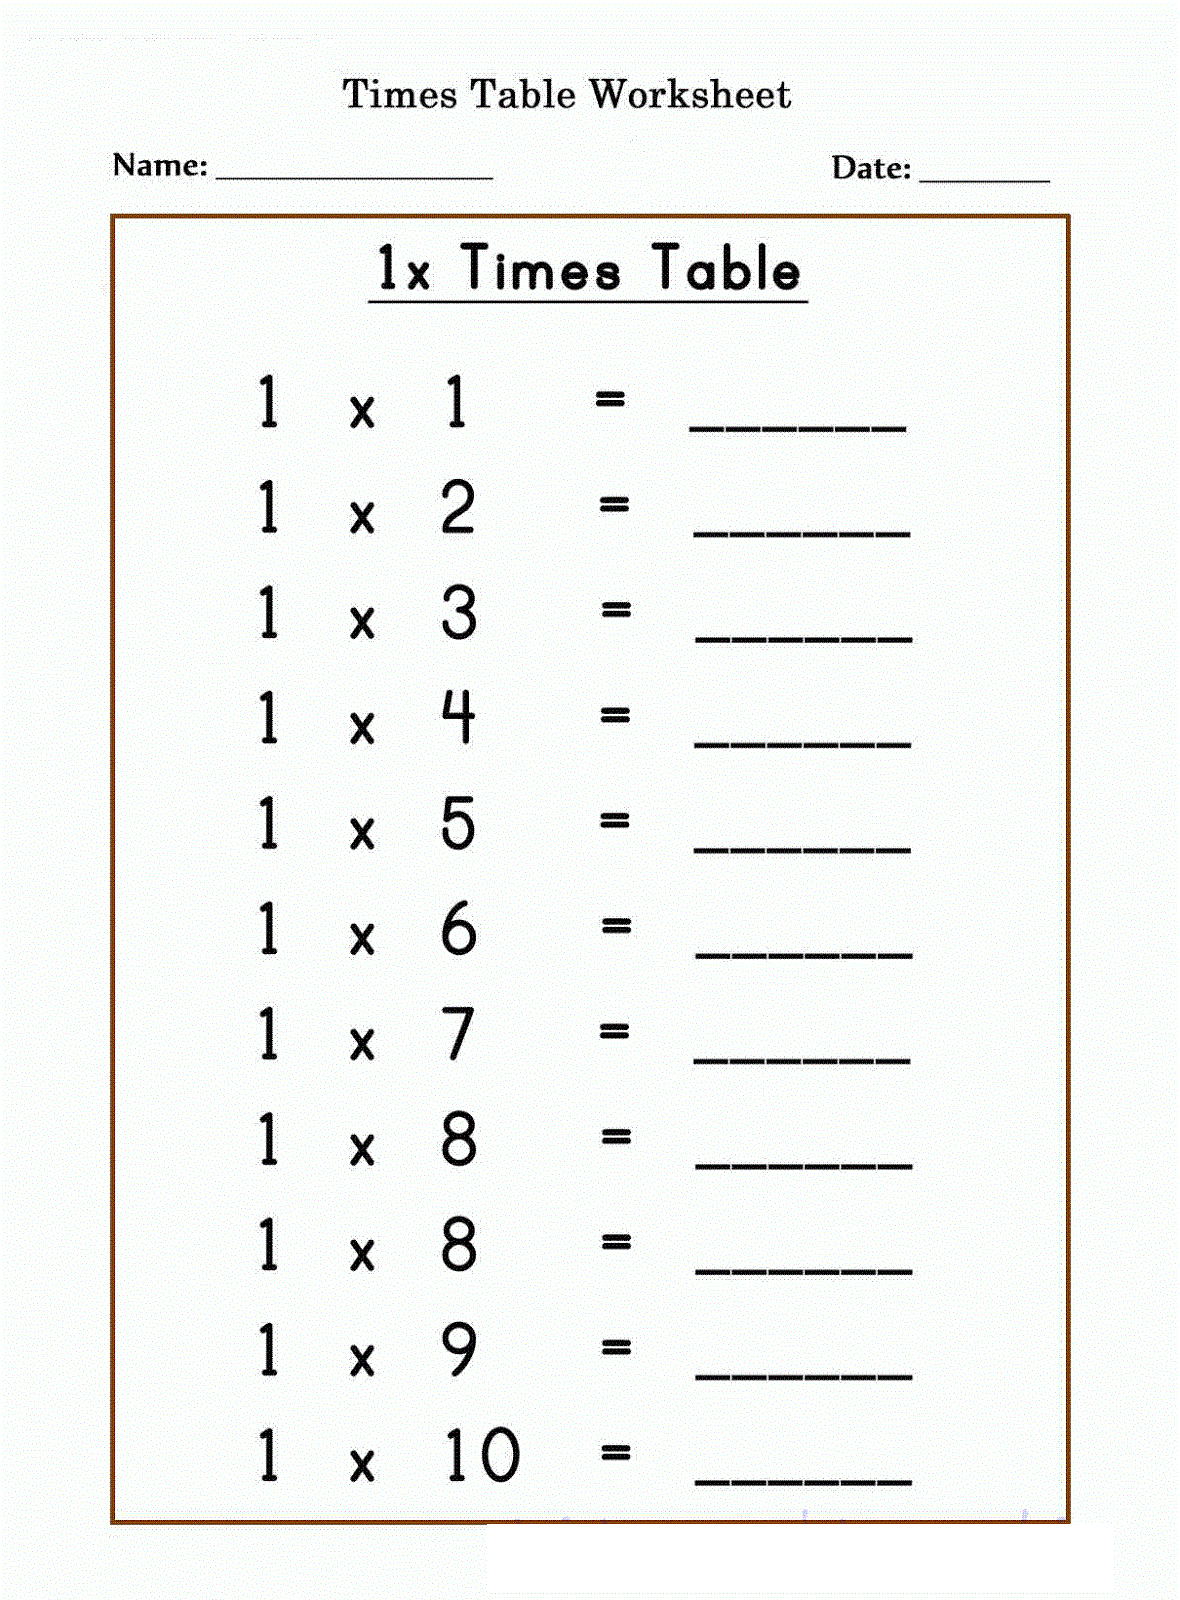 Times tables worksheets 1x times table